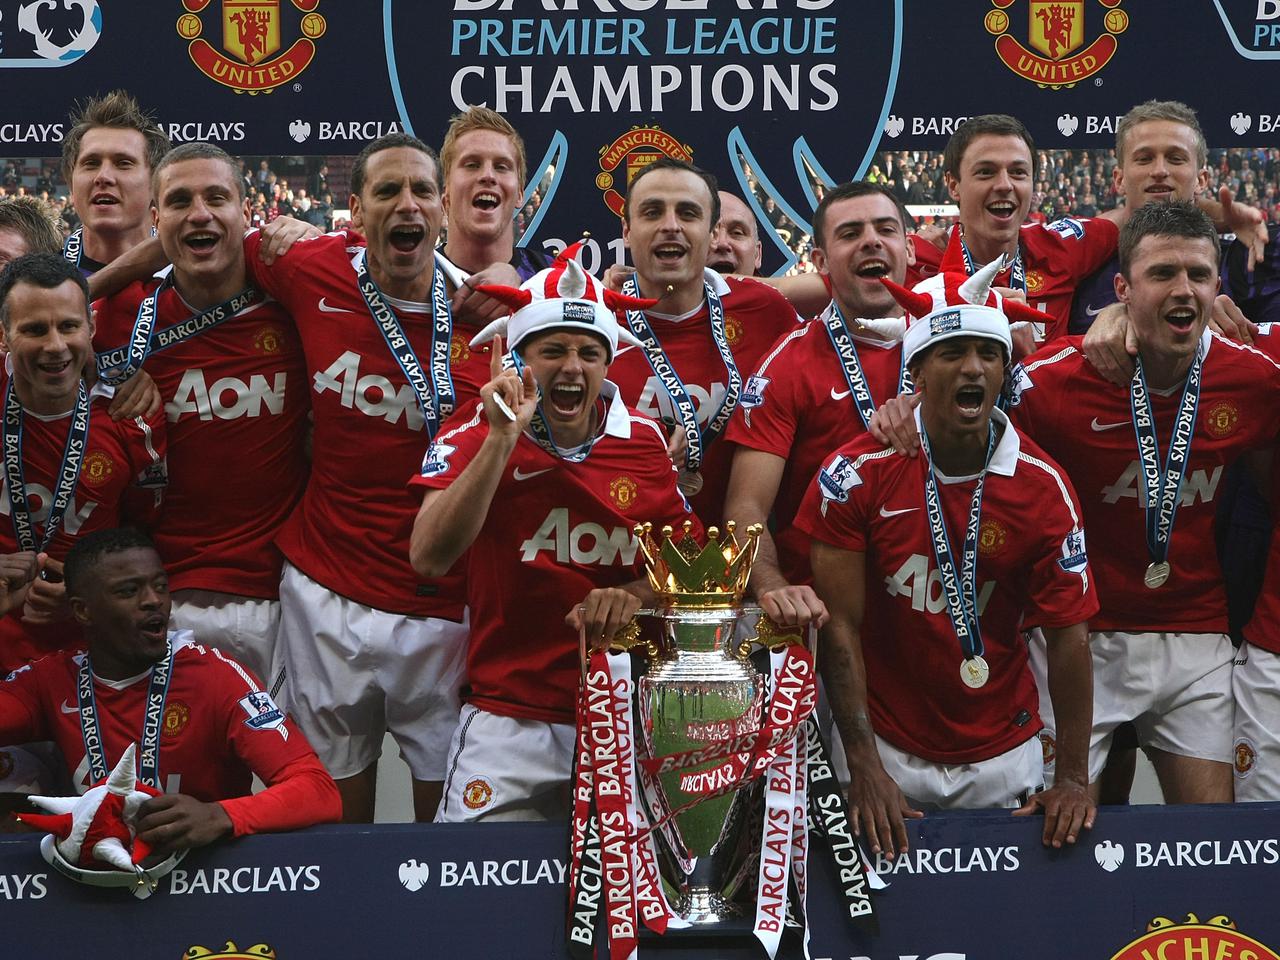 Manchester United Champions 2010/11  Manchester united champions,  Manchester united champions league, Manchester united premier league